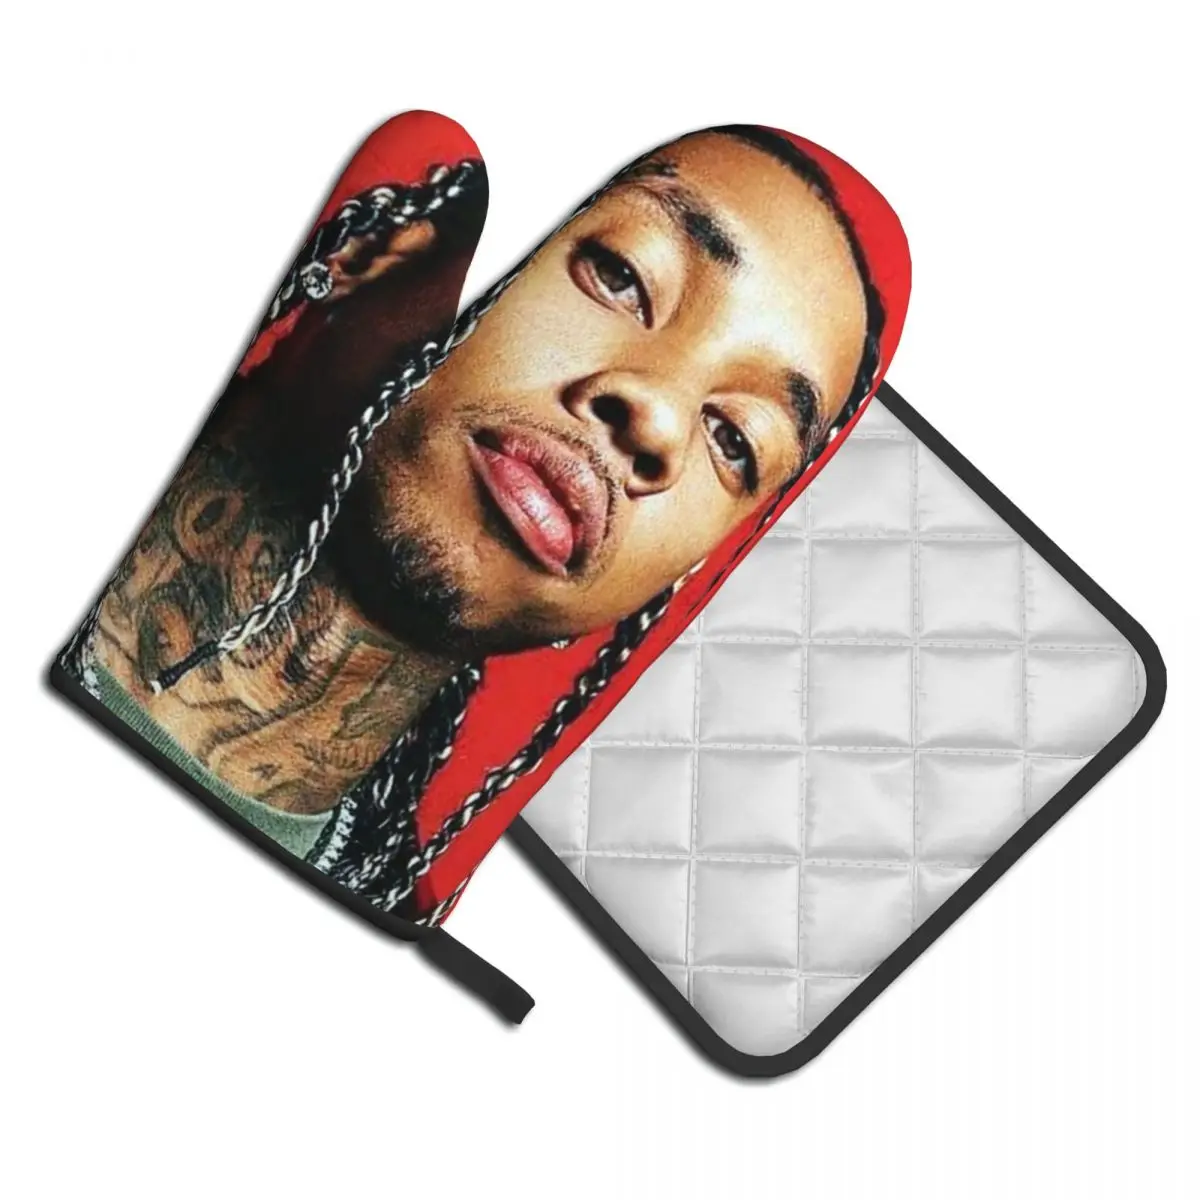 Tyga In Red Rap Hip Pop 2pcs Mitt Hot Pad funny singer Barbecue Heat Resistant Kitchen Gloves Microwave Oven Oven Mitts Set